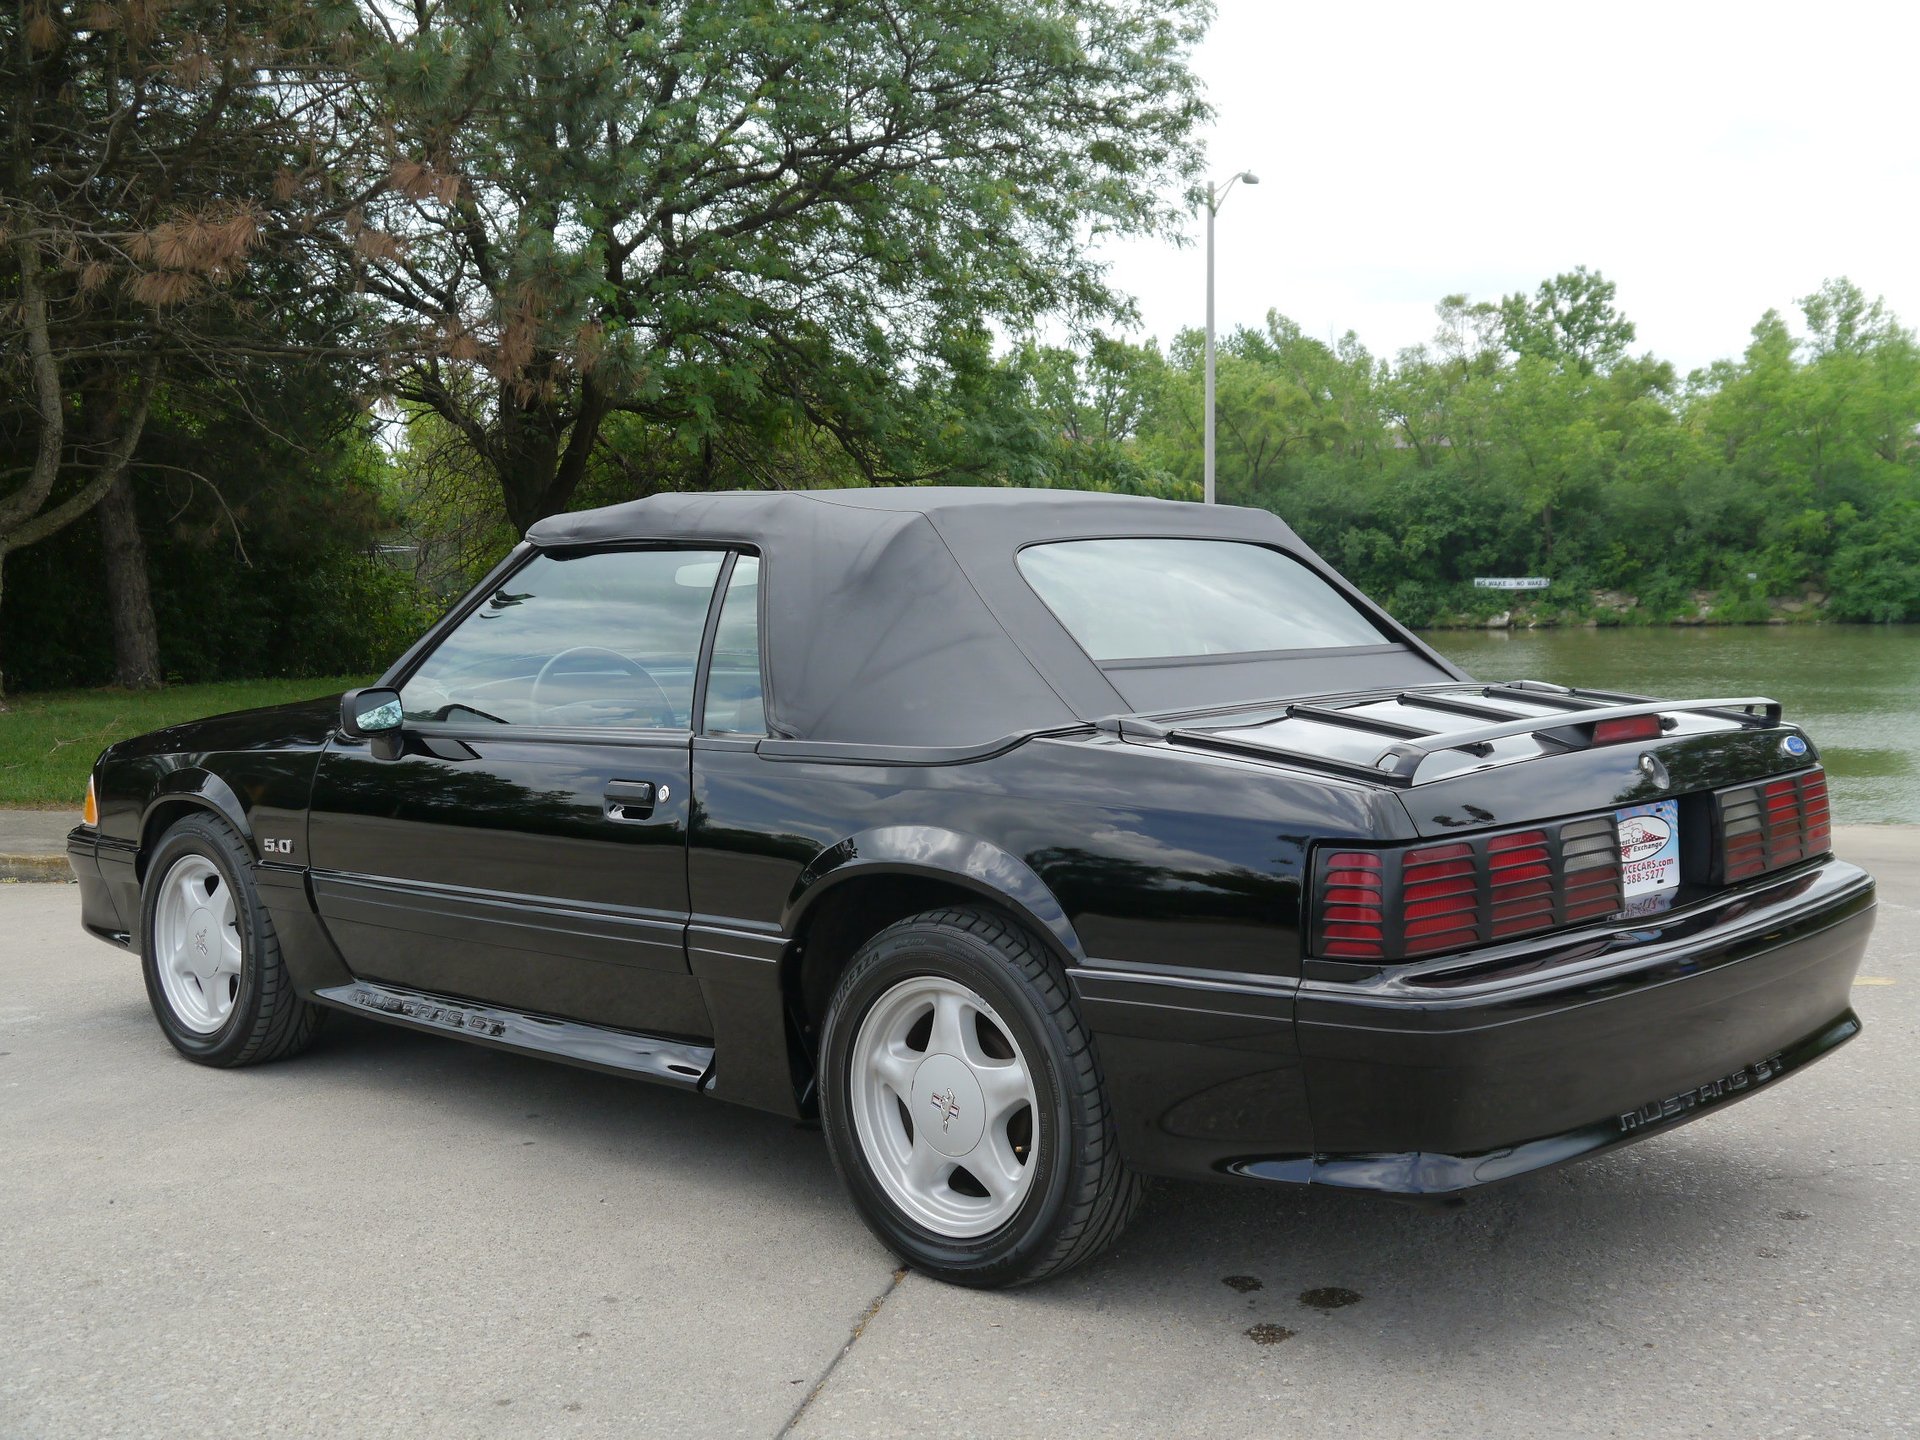 1993 Ford Mustang Gt Convertible For Sale 53052 Mcg